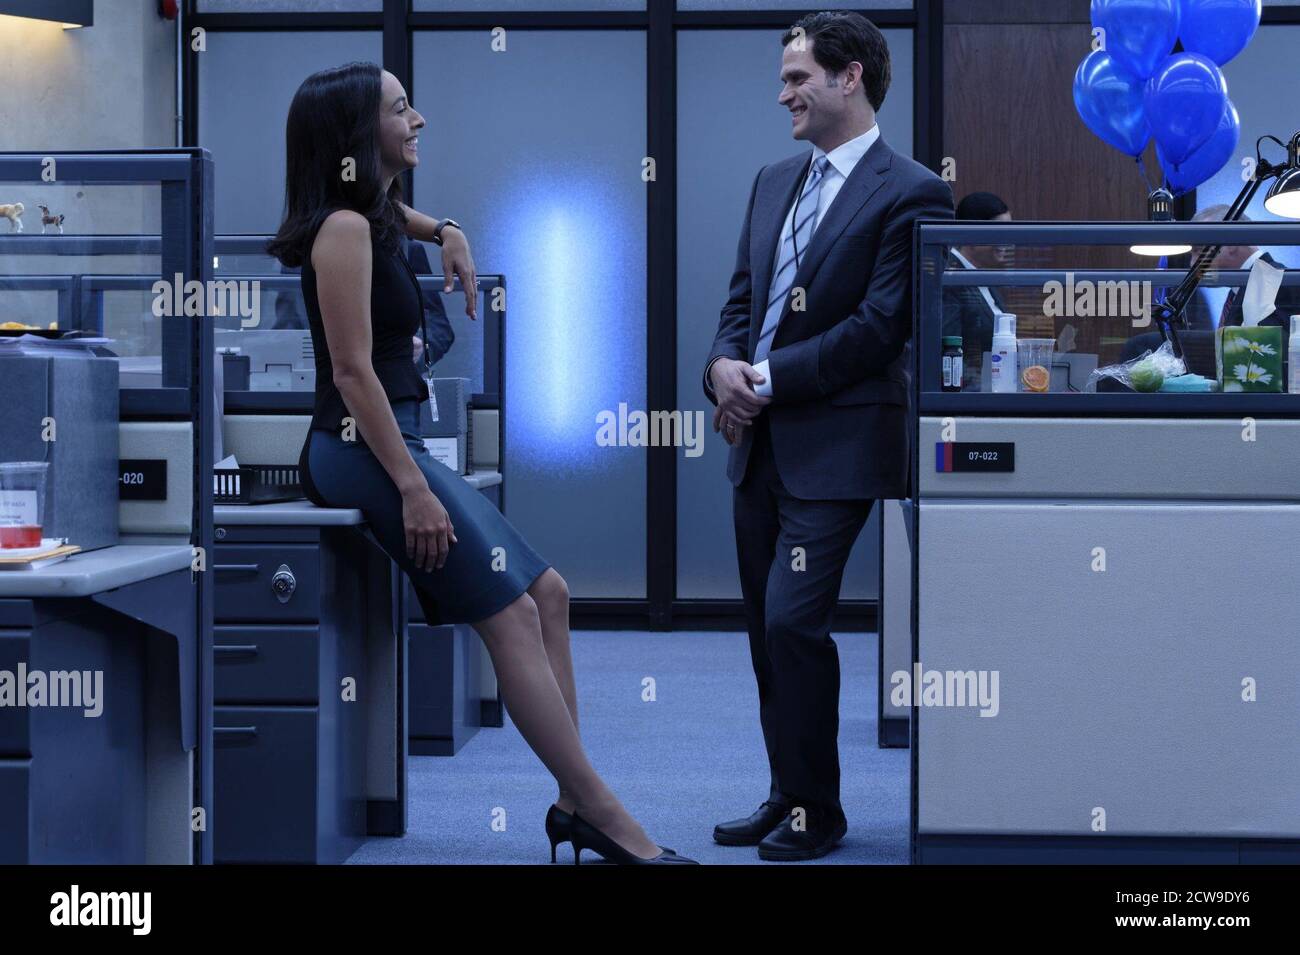 THE COMEY RULE, from left: Oona Chaplin, Steven Pasquale as Peter Strzok, 'Night One', (Episode 1, aired Sept. 27, 2020). photo: Ben Mark Holzberg / ©Showtime / Courtesy Everett Collection Stock Photo